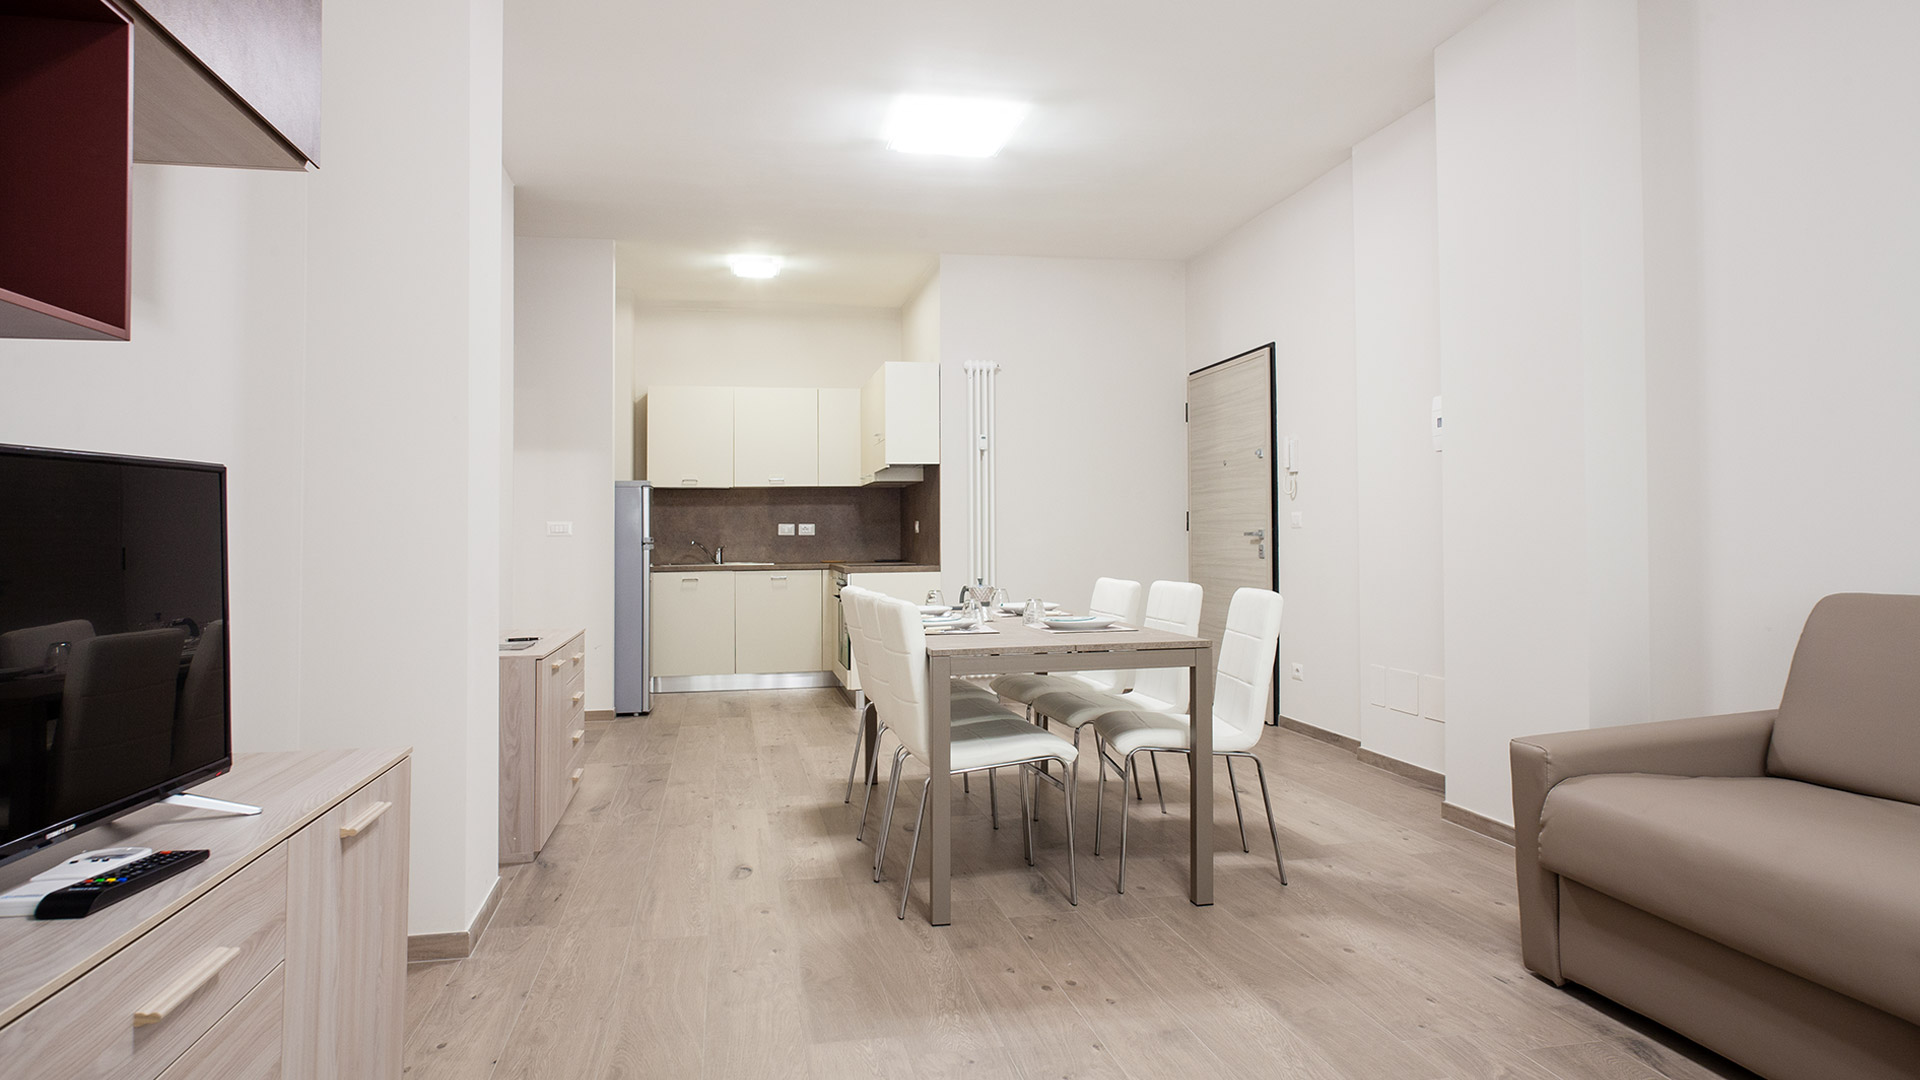 Three-room apartments for six people near Bologna station - Hotel Astoria